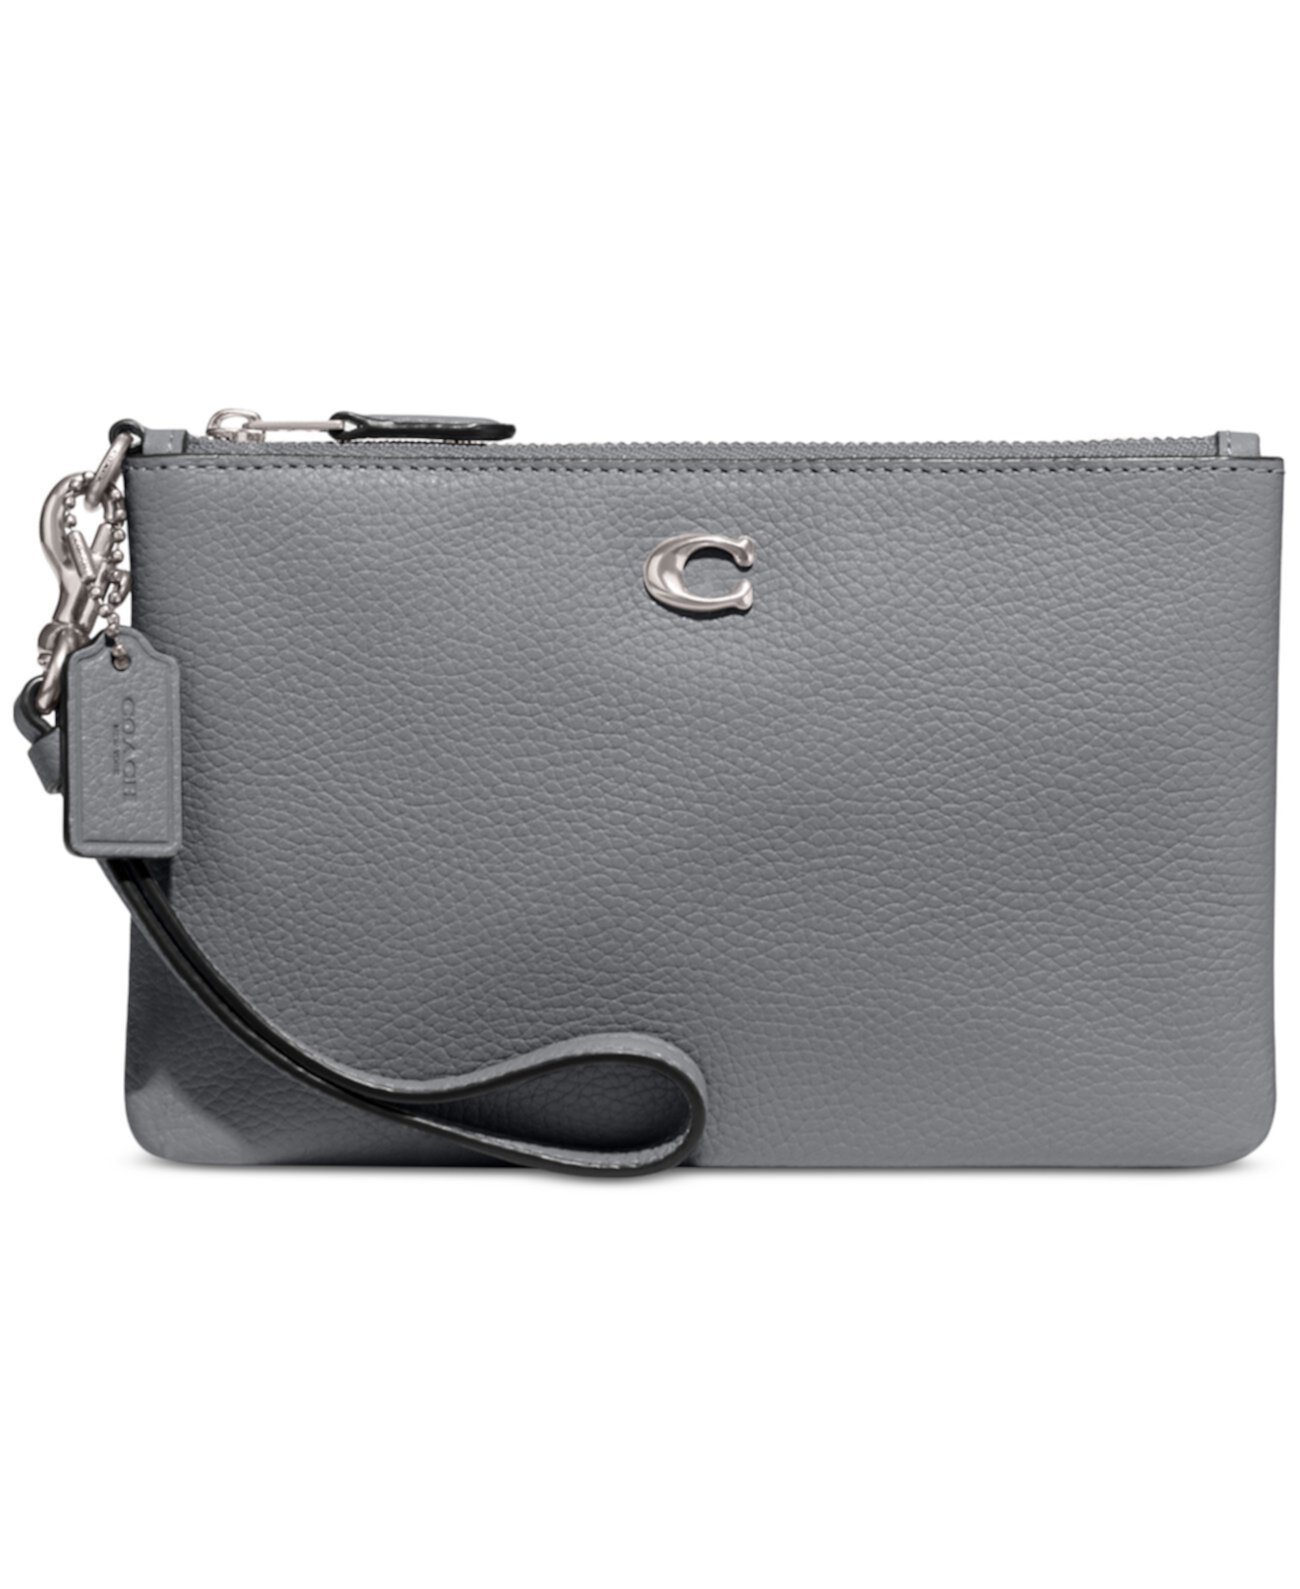 Polished Pebble Leather Small Zip-Top Wristlet COACH